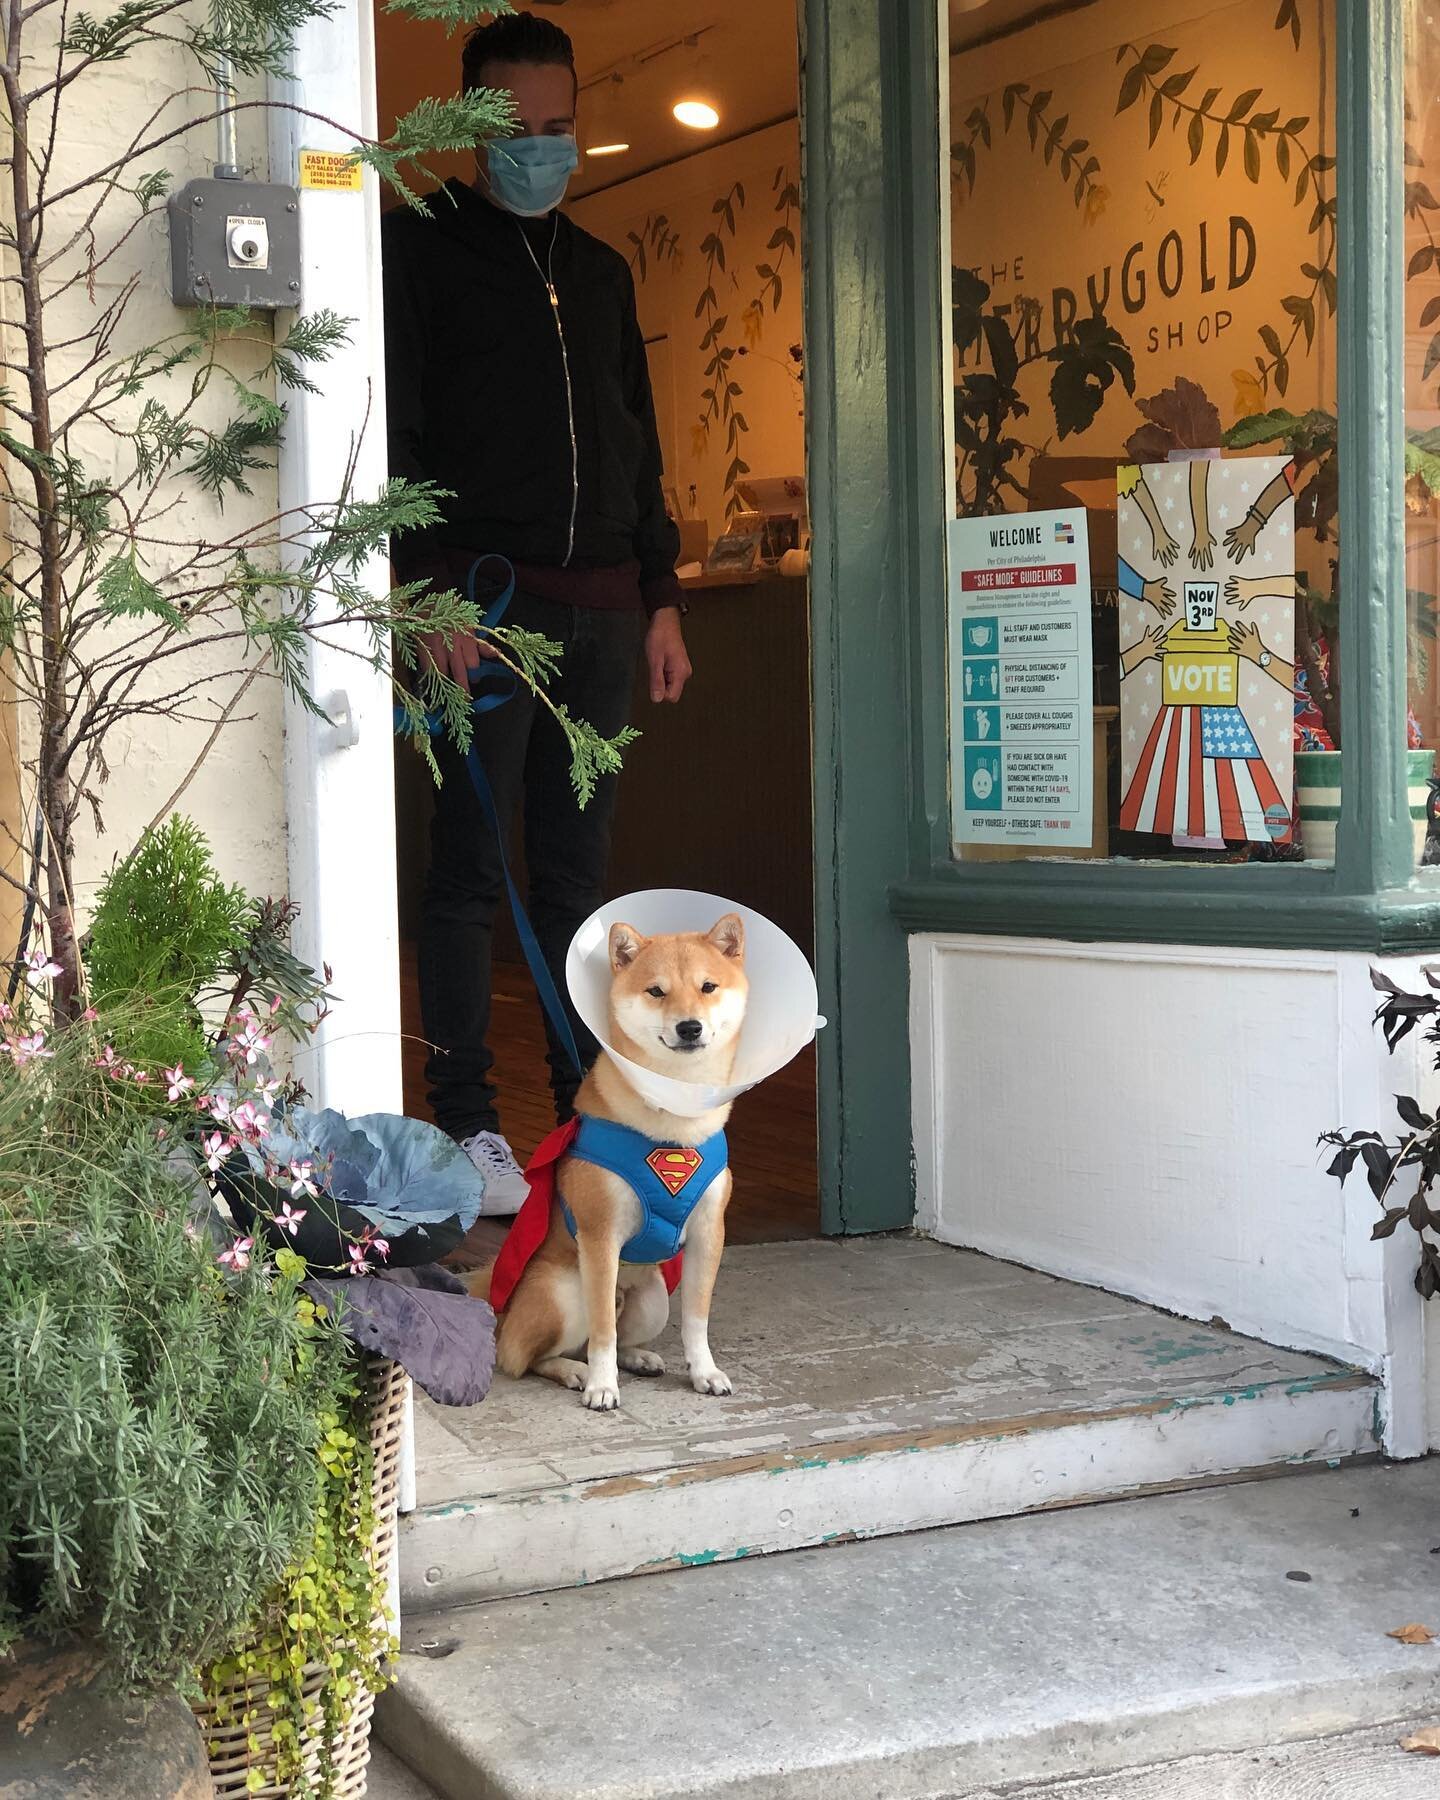 Honored with a super cone doggie visit today by one of merrygolds fave neighbor 🐕@phoenix_the_shiba_inu - already looking forward to next Halloween 👻